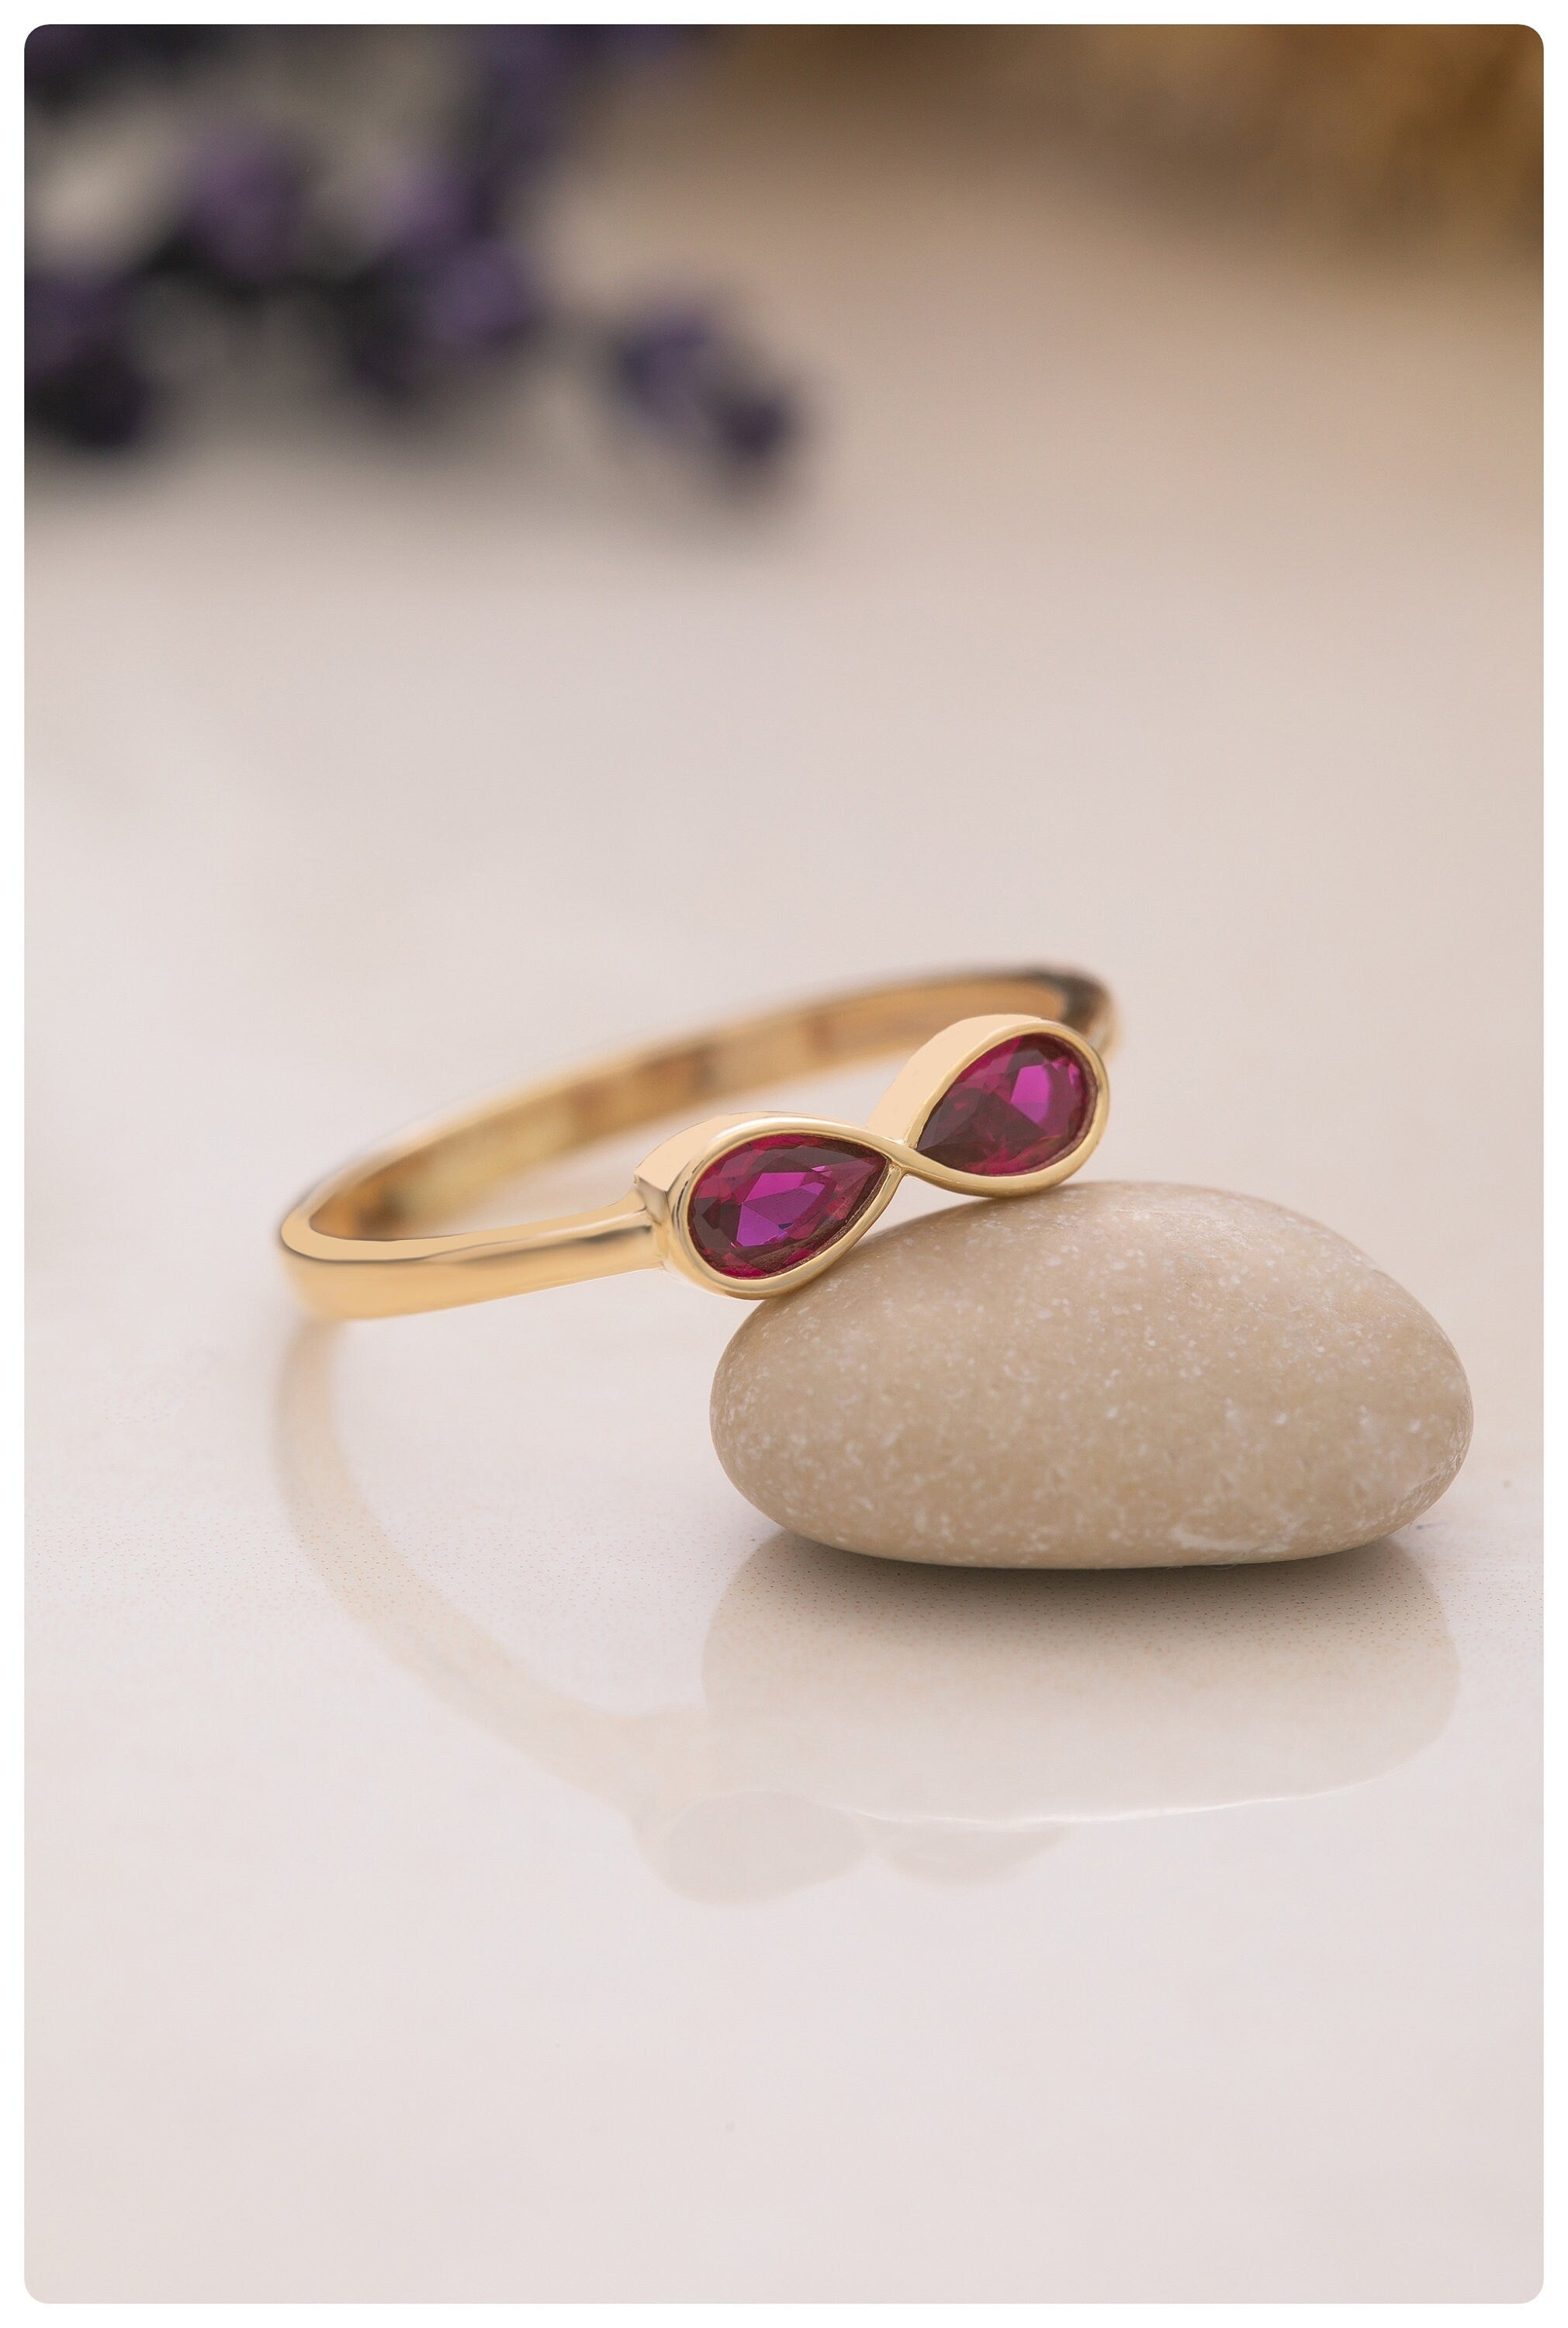 Natural Diamond Ruby Gold Ring - 14K Solid Gold Rings - Minimalist Gold Ring - Everyday Women Ring - Gift For Mother Day- Mother Day Jewelry